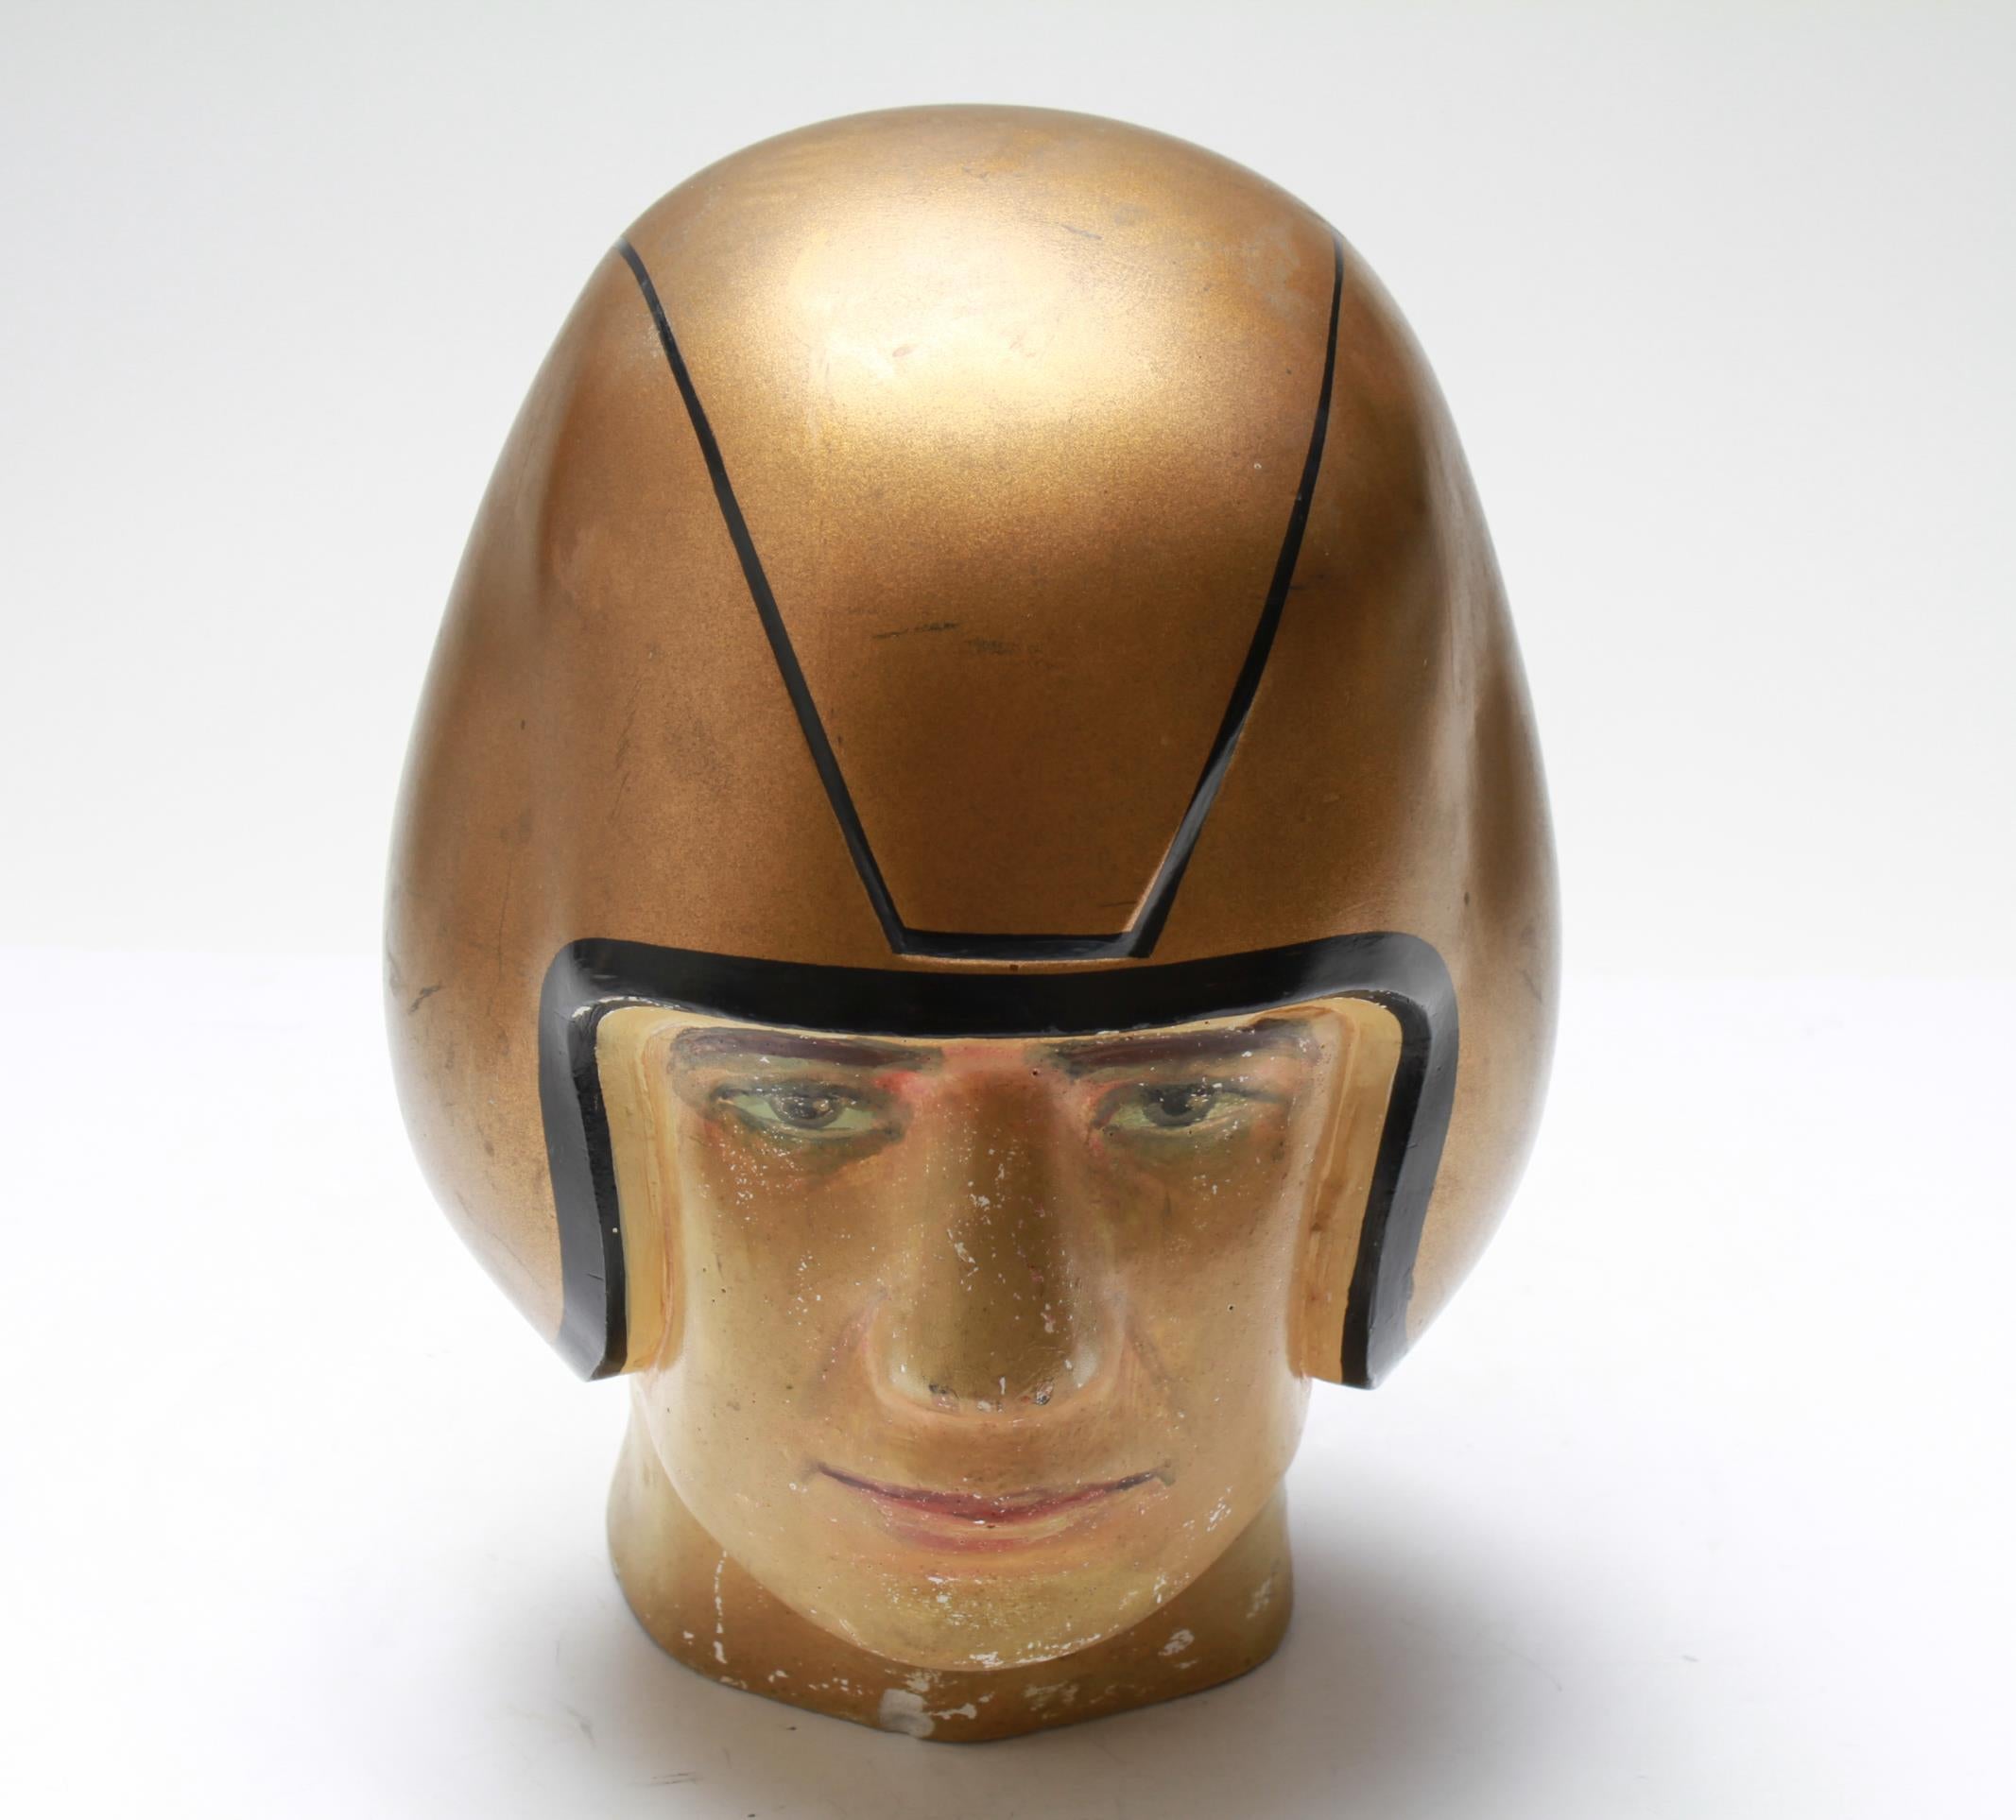 American Folk Art football player bust in composite material, wearing a gold-tone helmet. The piece is in good vintage condition and was made in the mid-20th century.